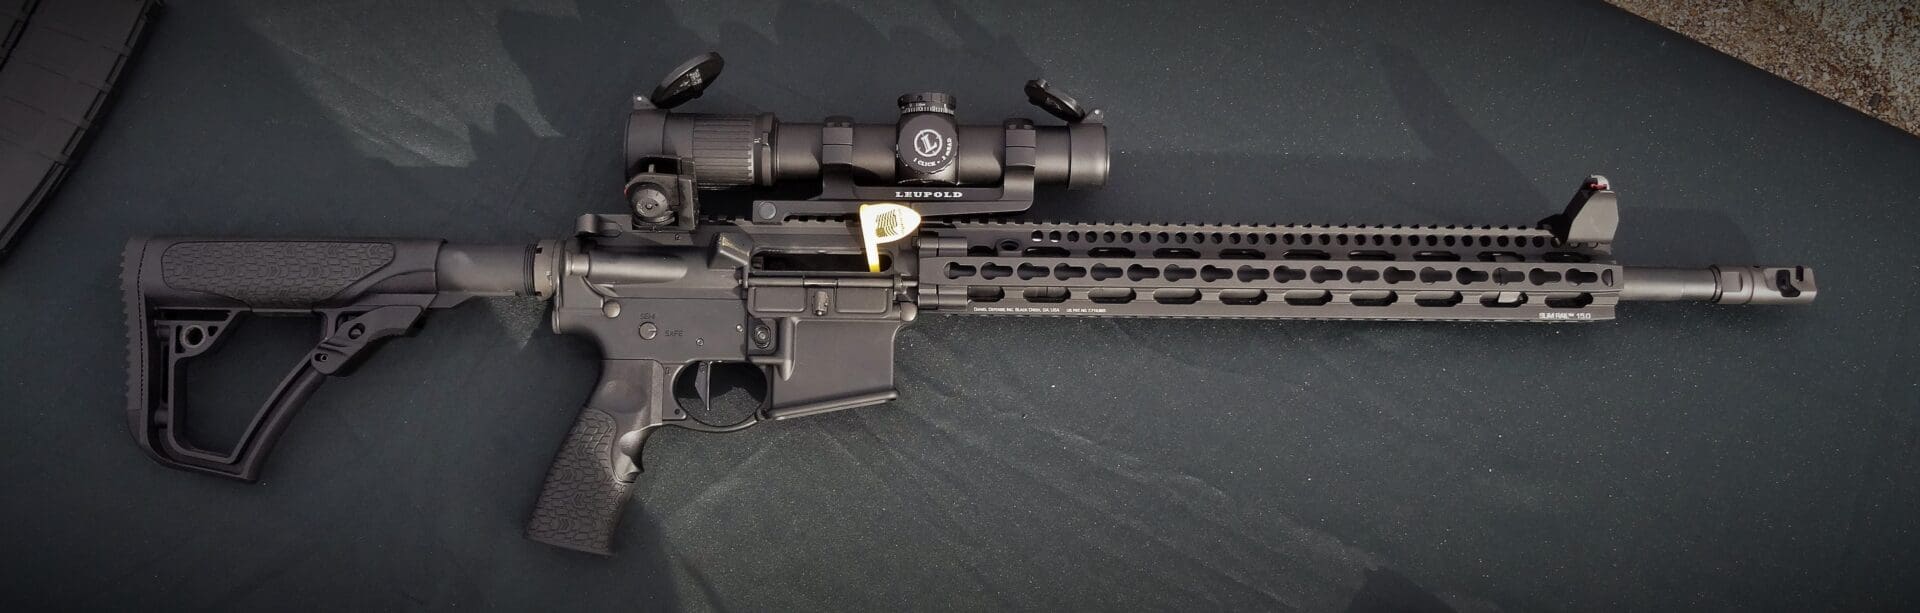 New From Daniel Defense V11 Pro The Truth About Guns